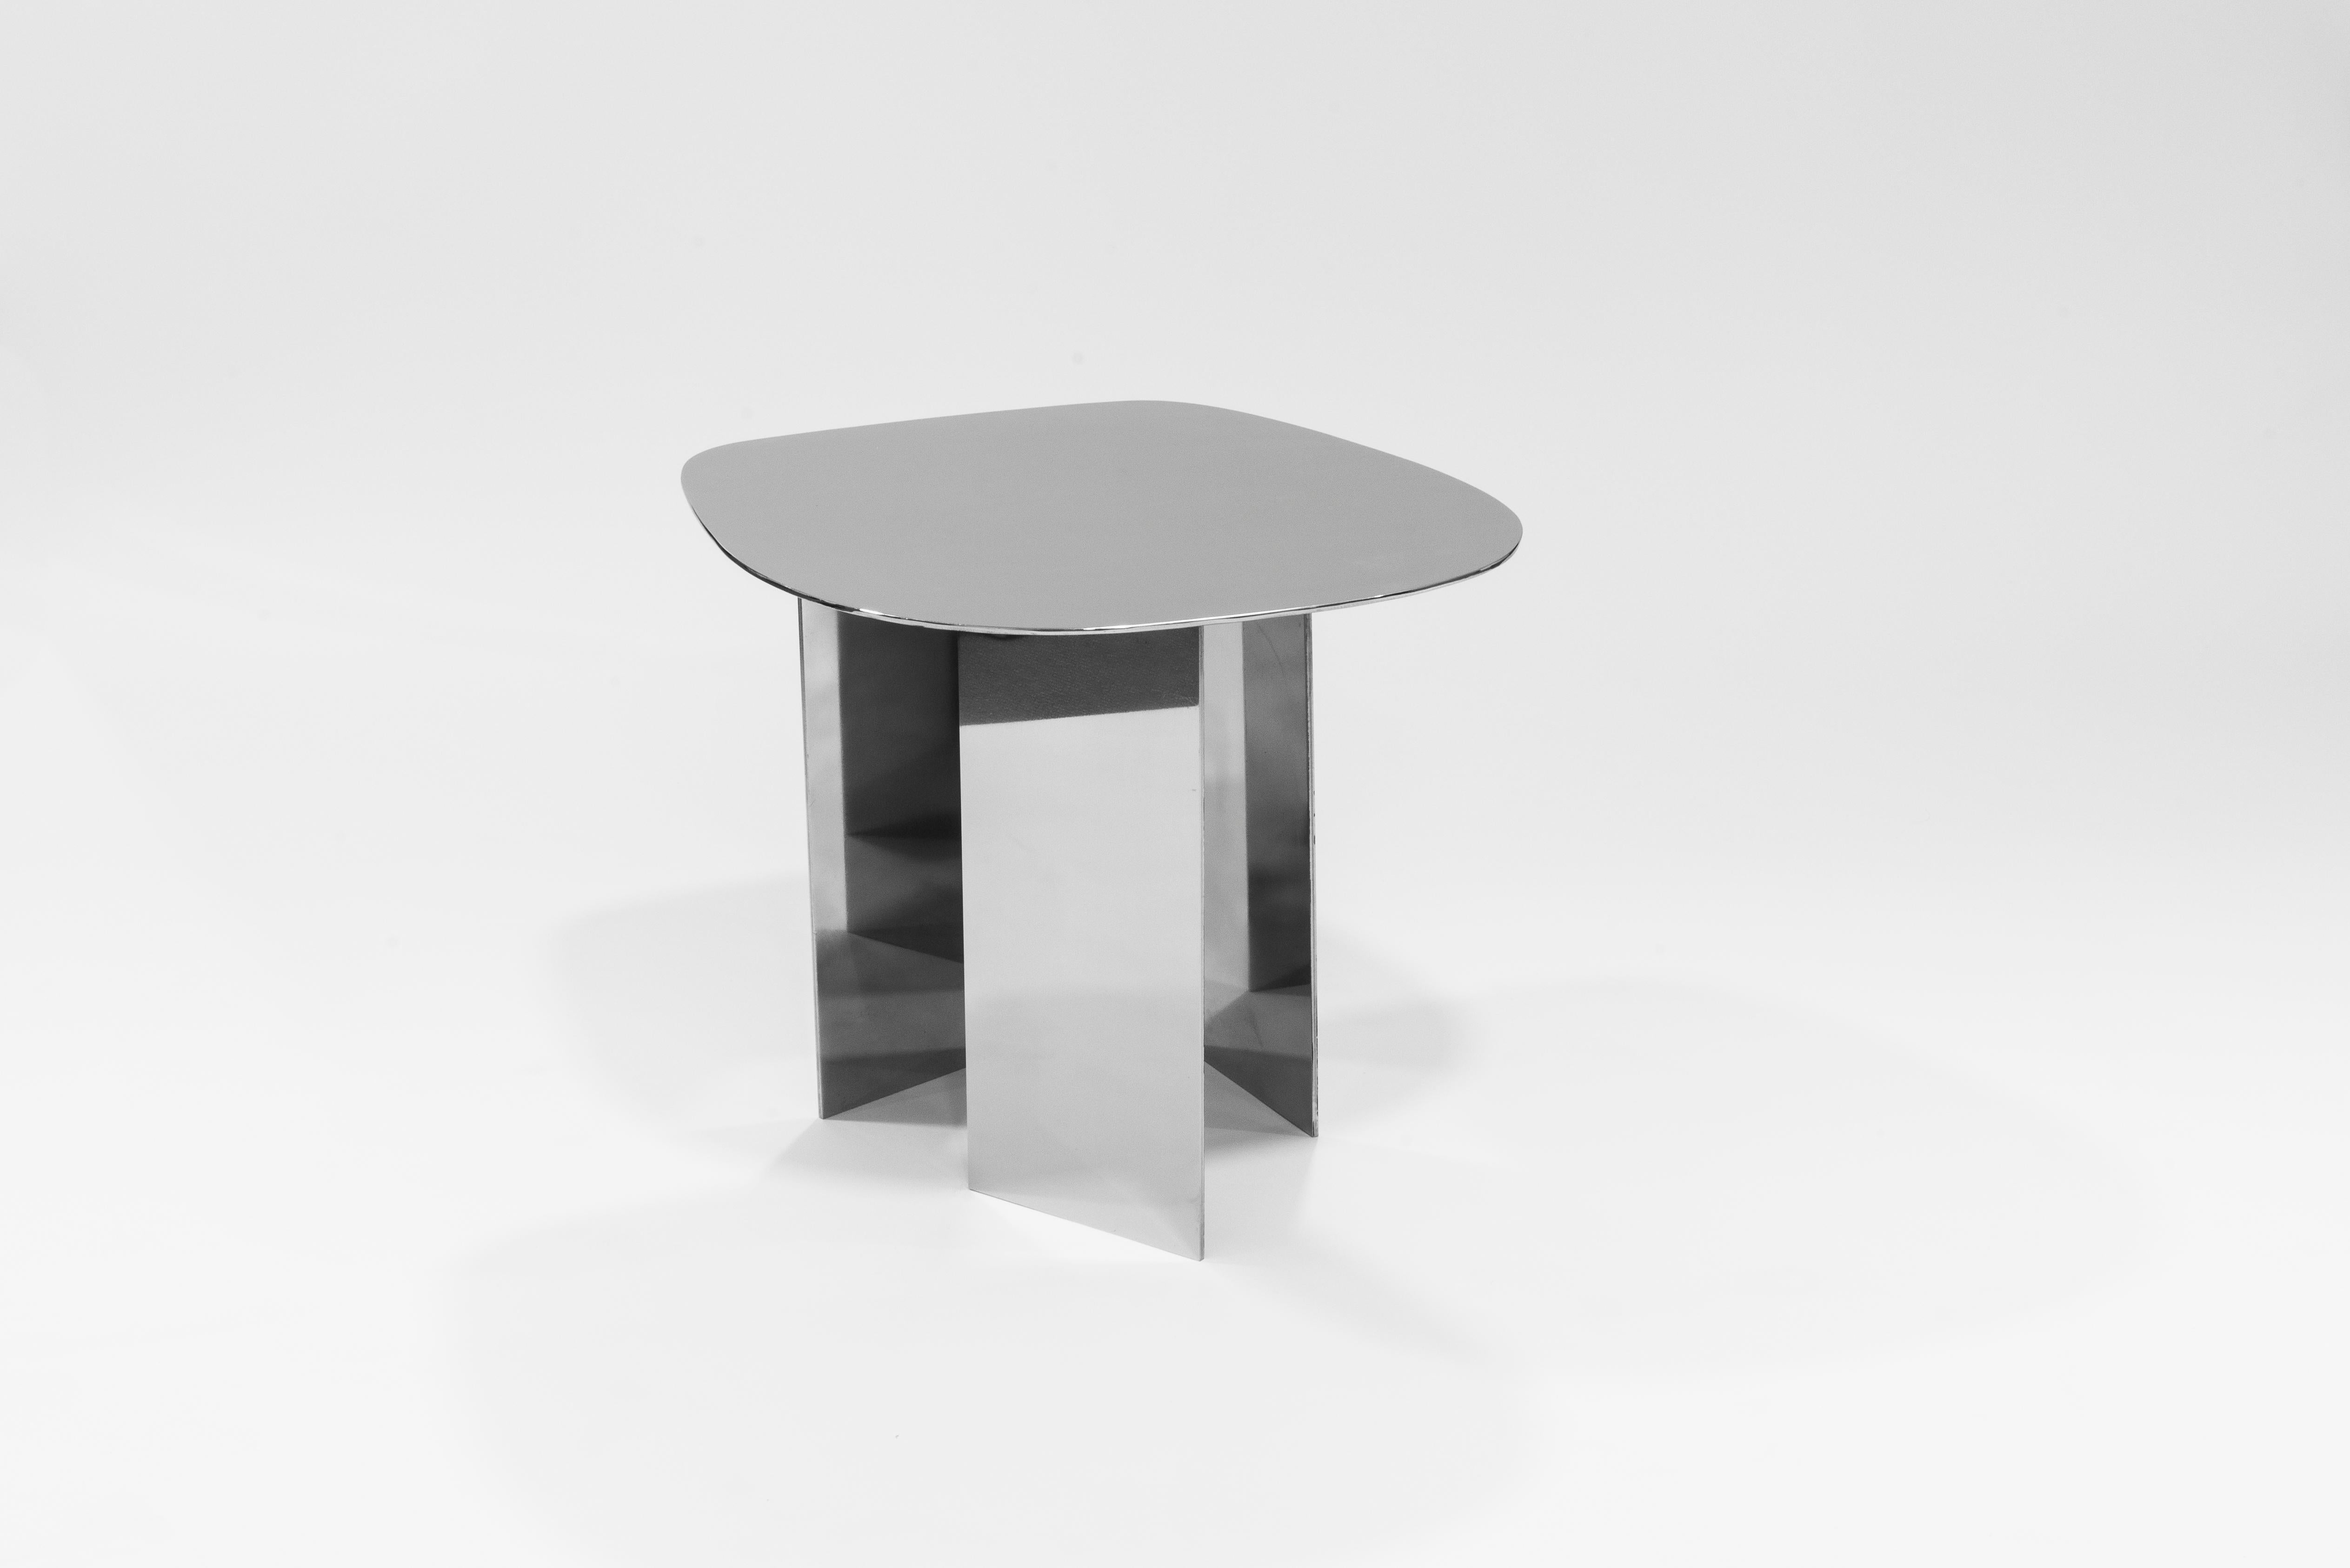 LT02 coffee table in polished steel is presented by Sabourin Costes, France, 2020

LT-02 is a set of two nested tables which manipulates the reflexions and distortions of their surroundings. Their polished stainless steel surfaces decompose and